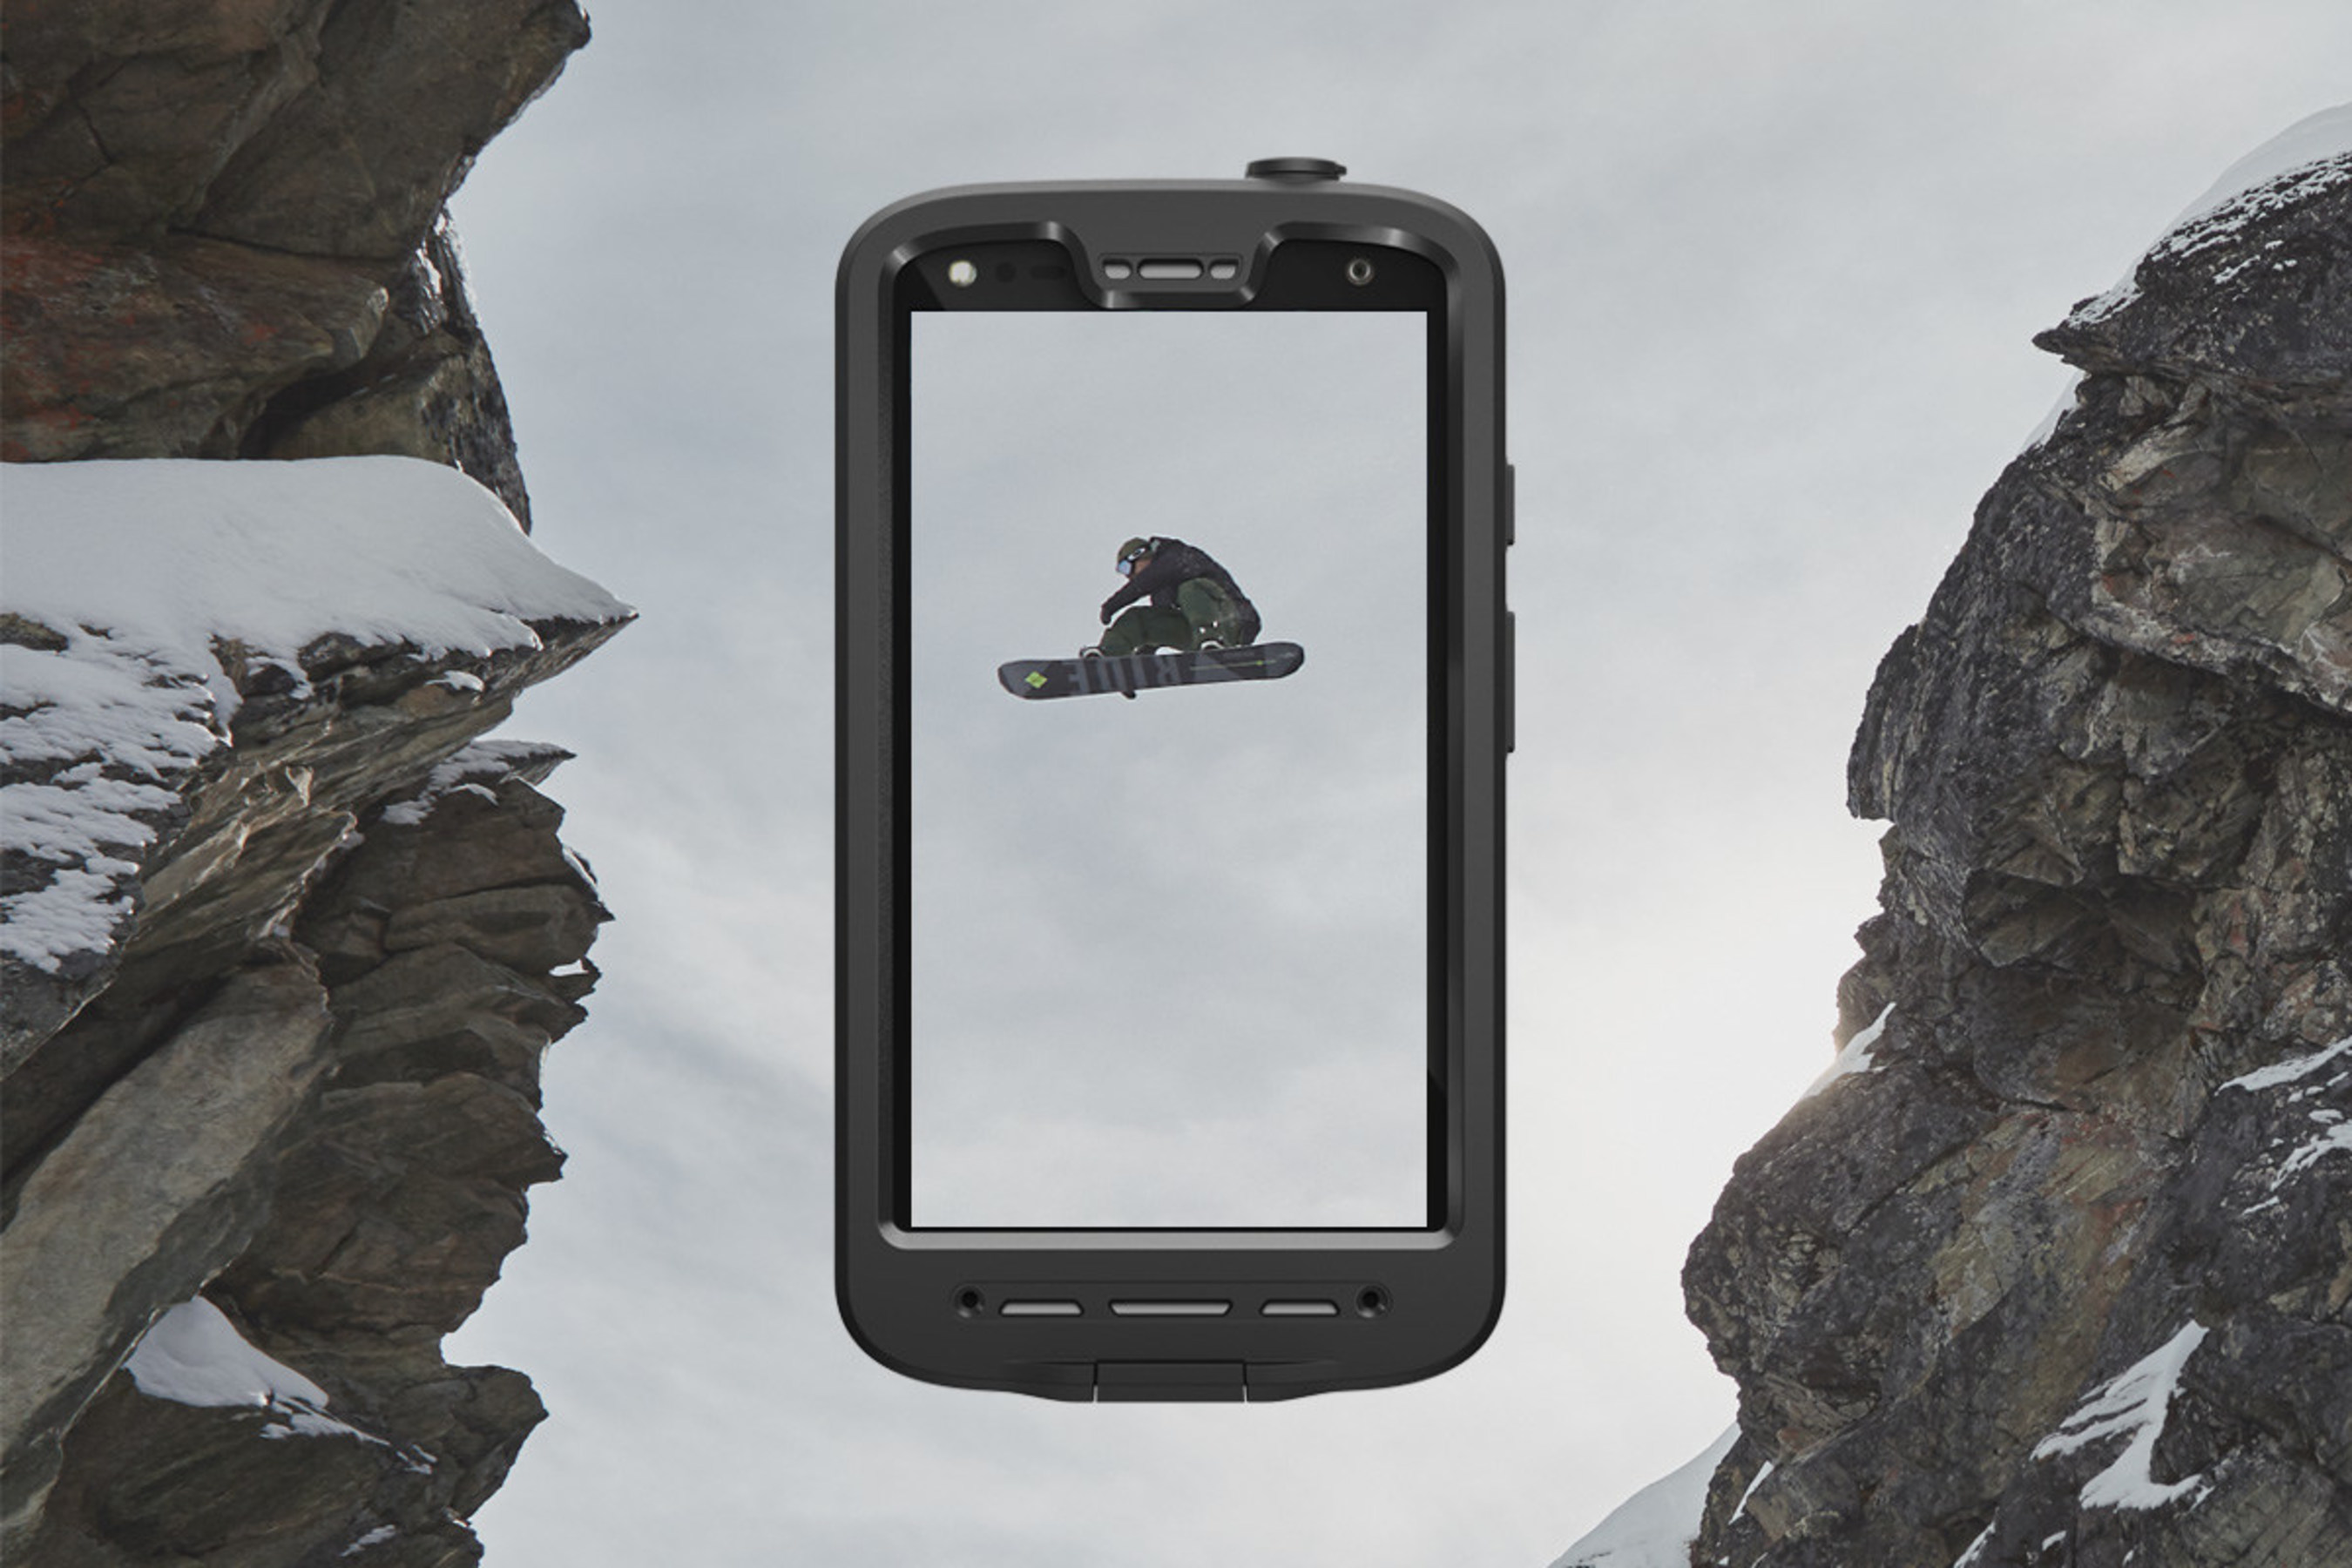 LifeProof FRE allows you to take DROID Turbo 2 on almost any adventure with waterproof, drop proof technology.